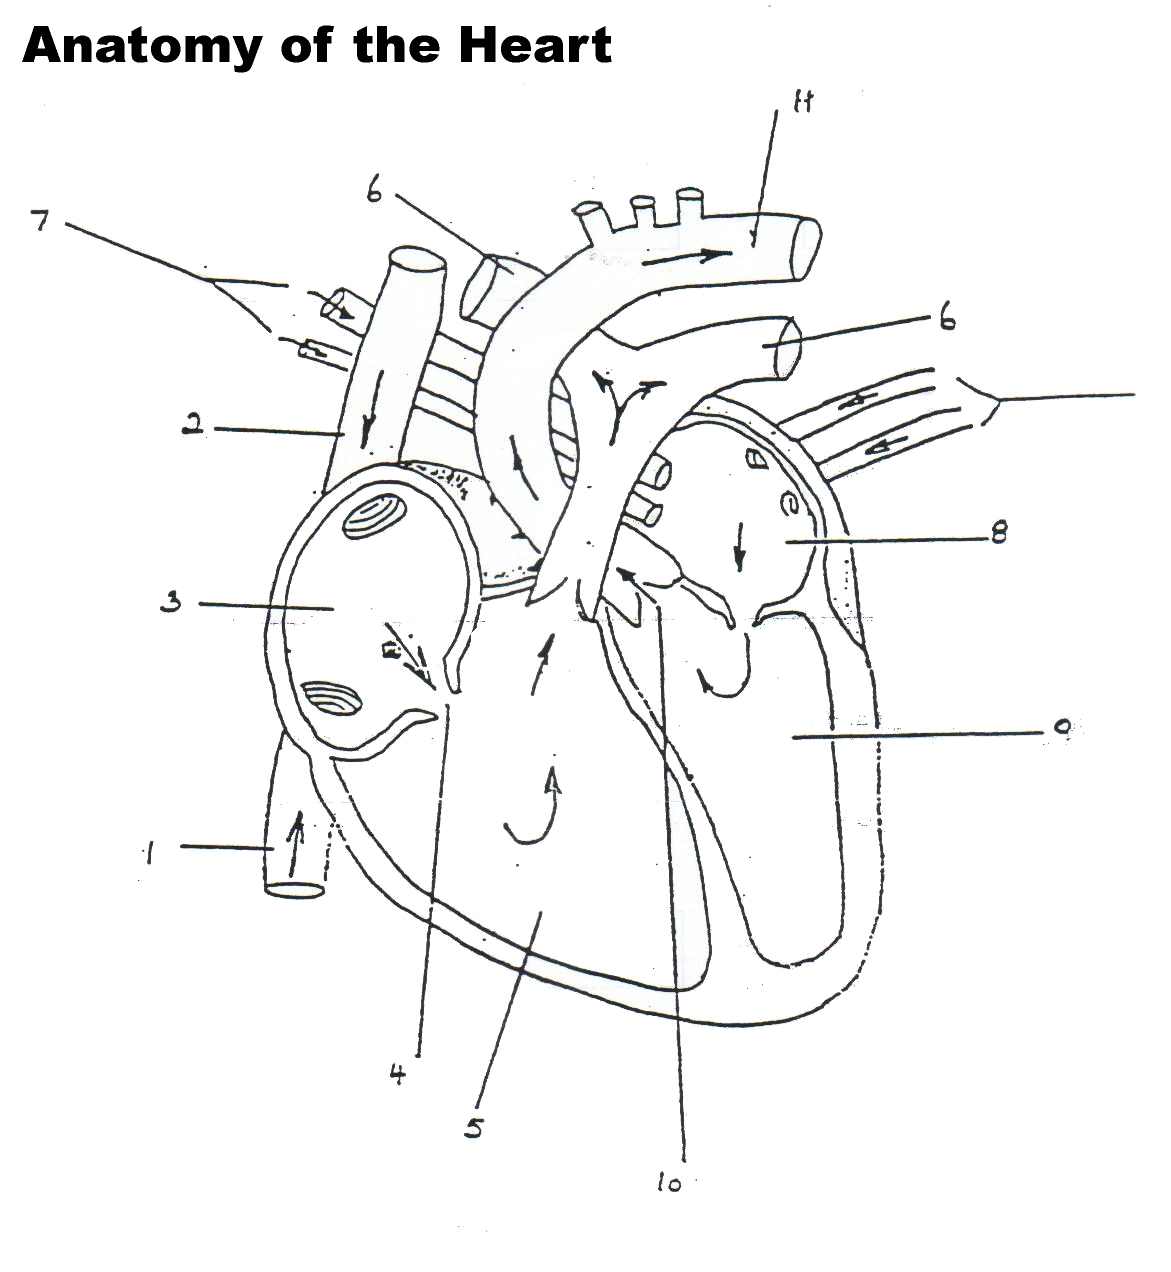 Blood Flow Through The Heart Diagram Heart Diagram Drawing At Getdrawings Free For Personal Use